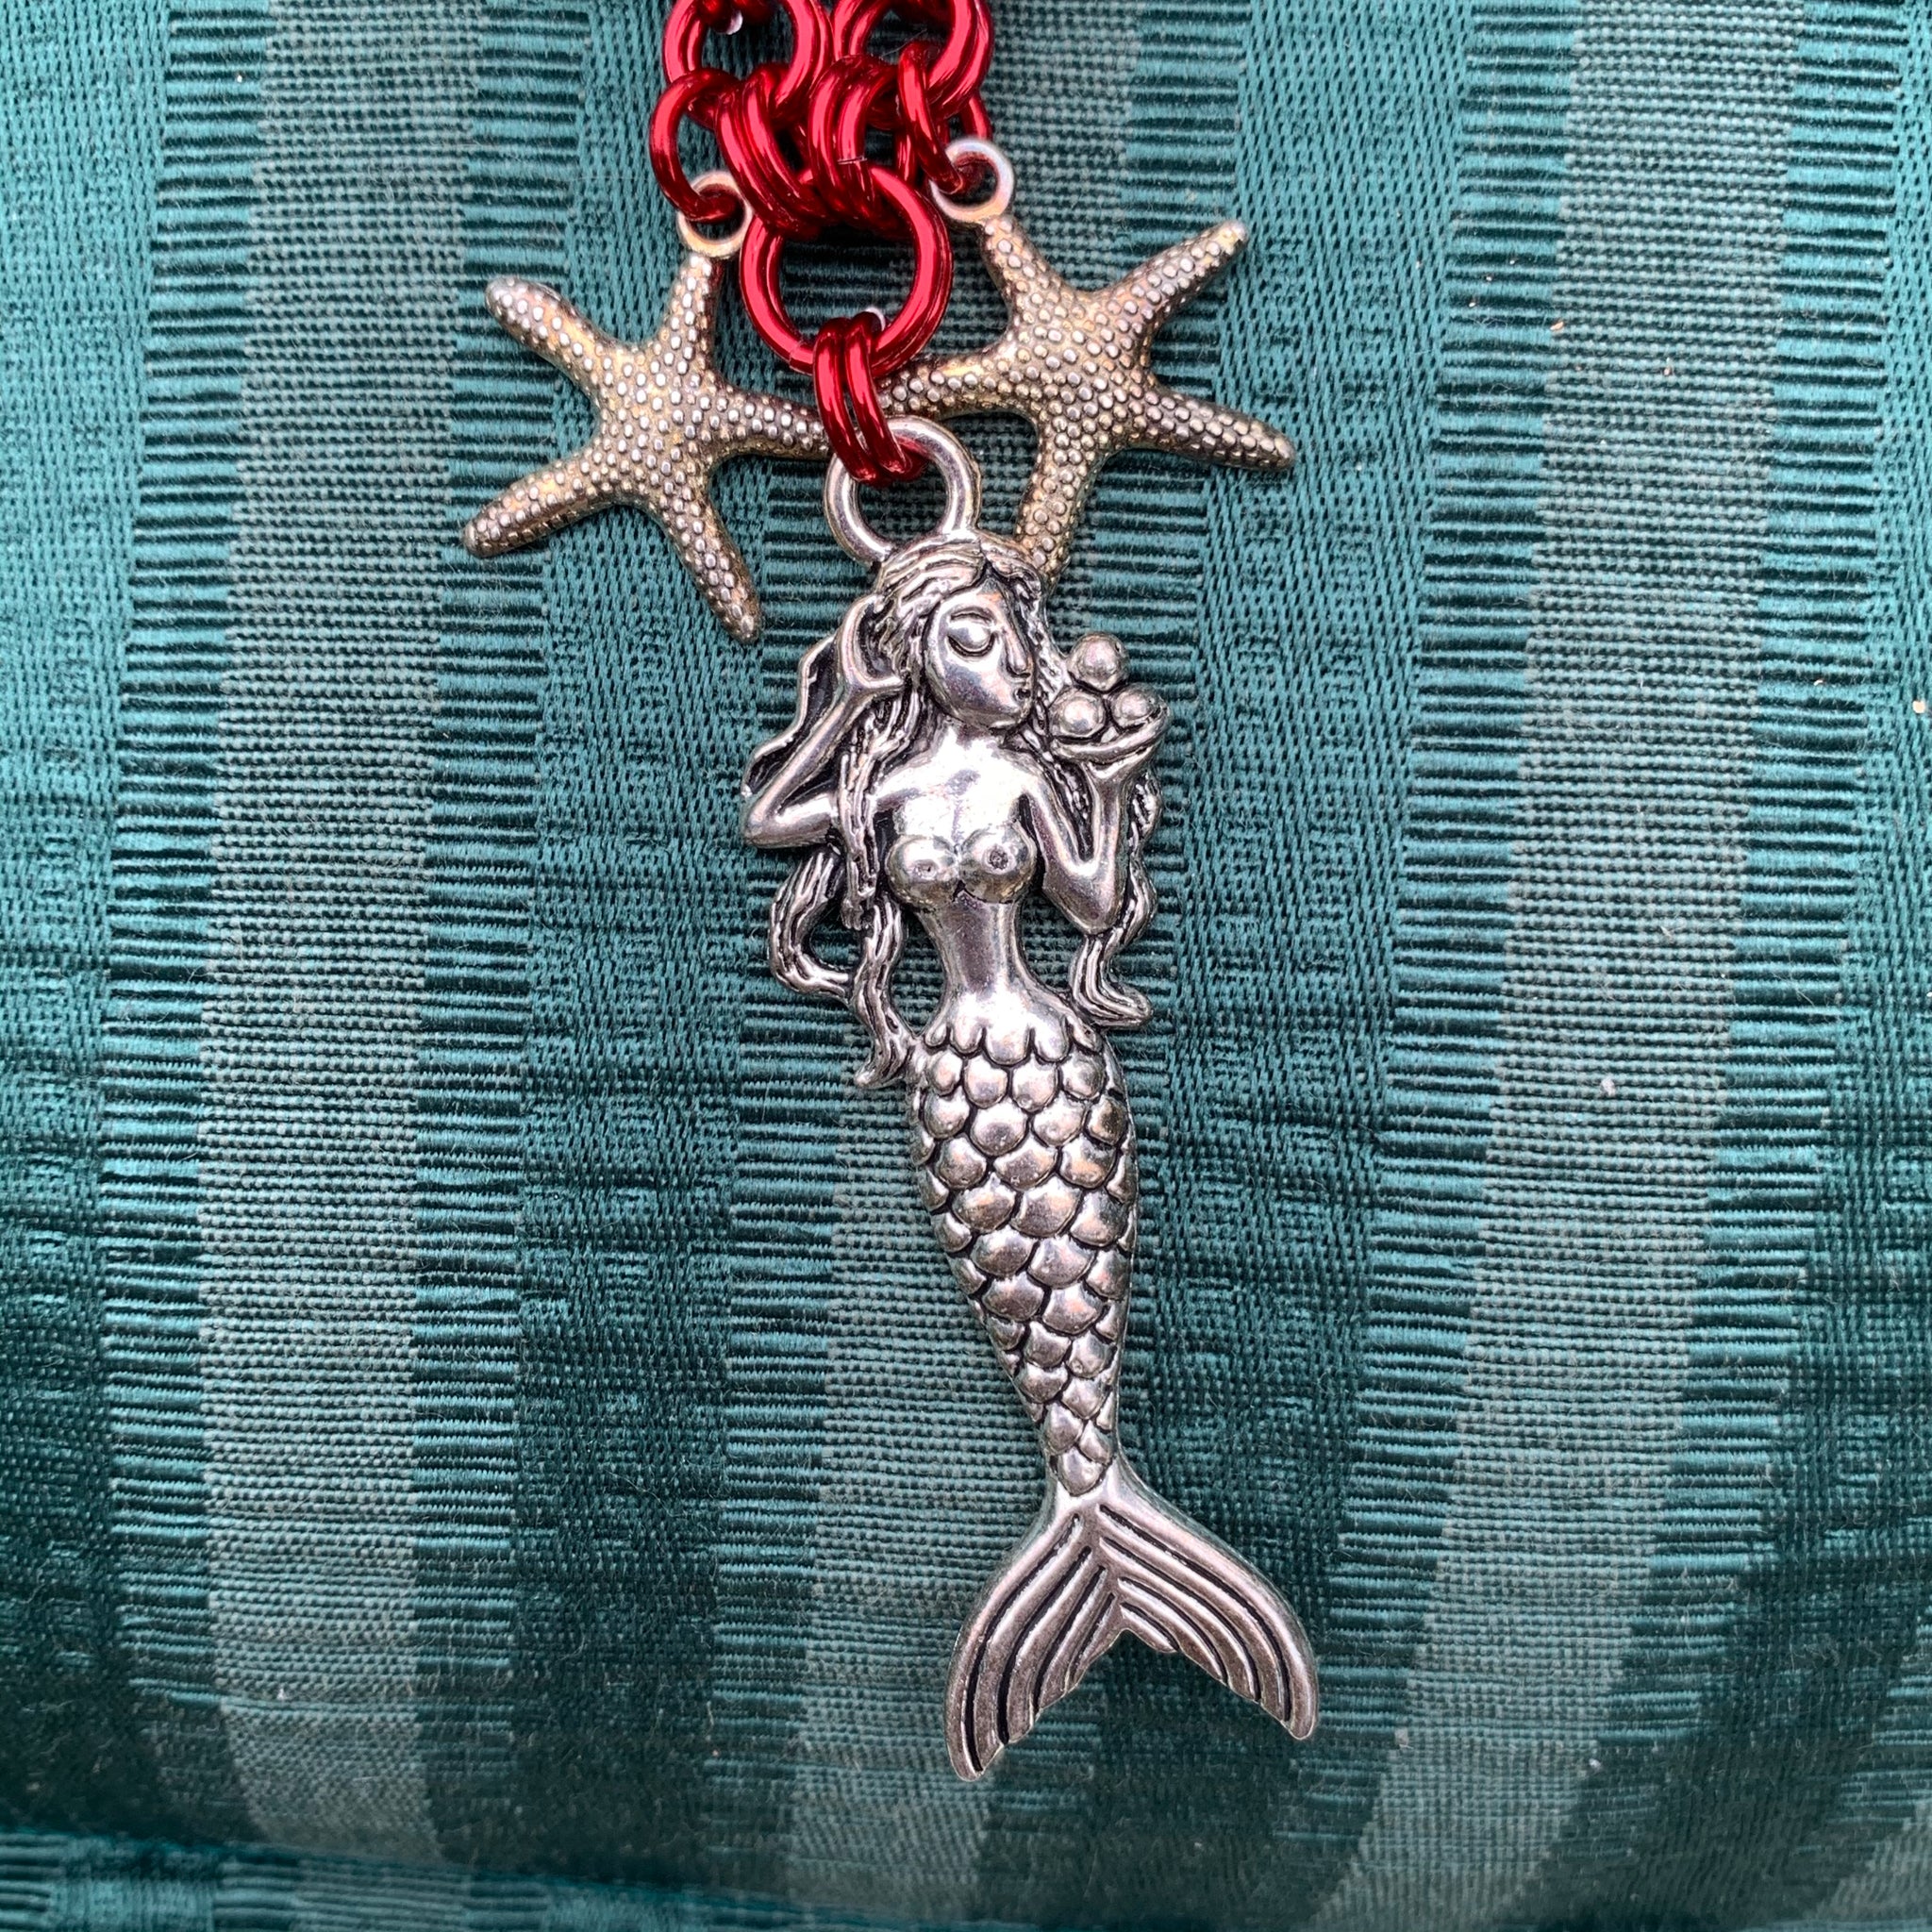 Mermaid and Chainmaille Necklace